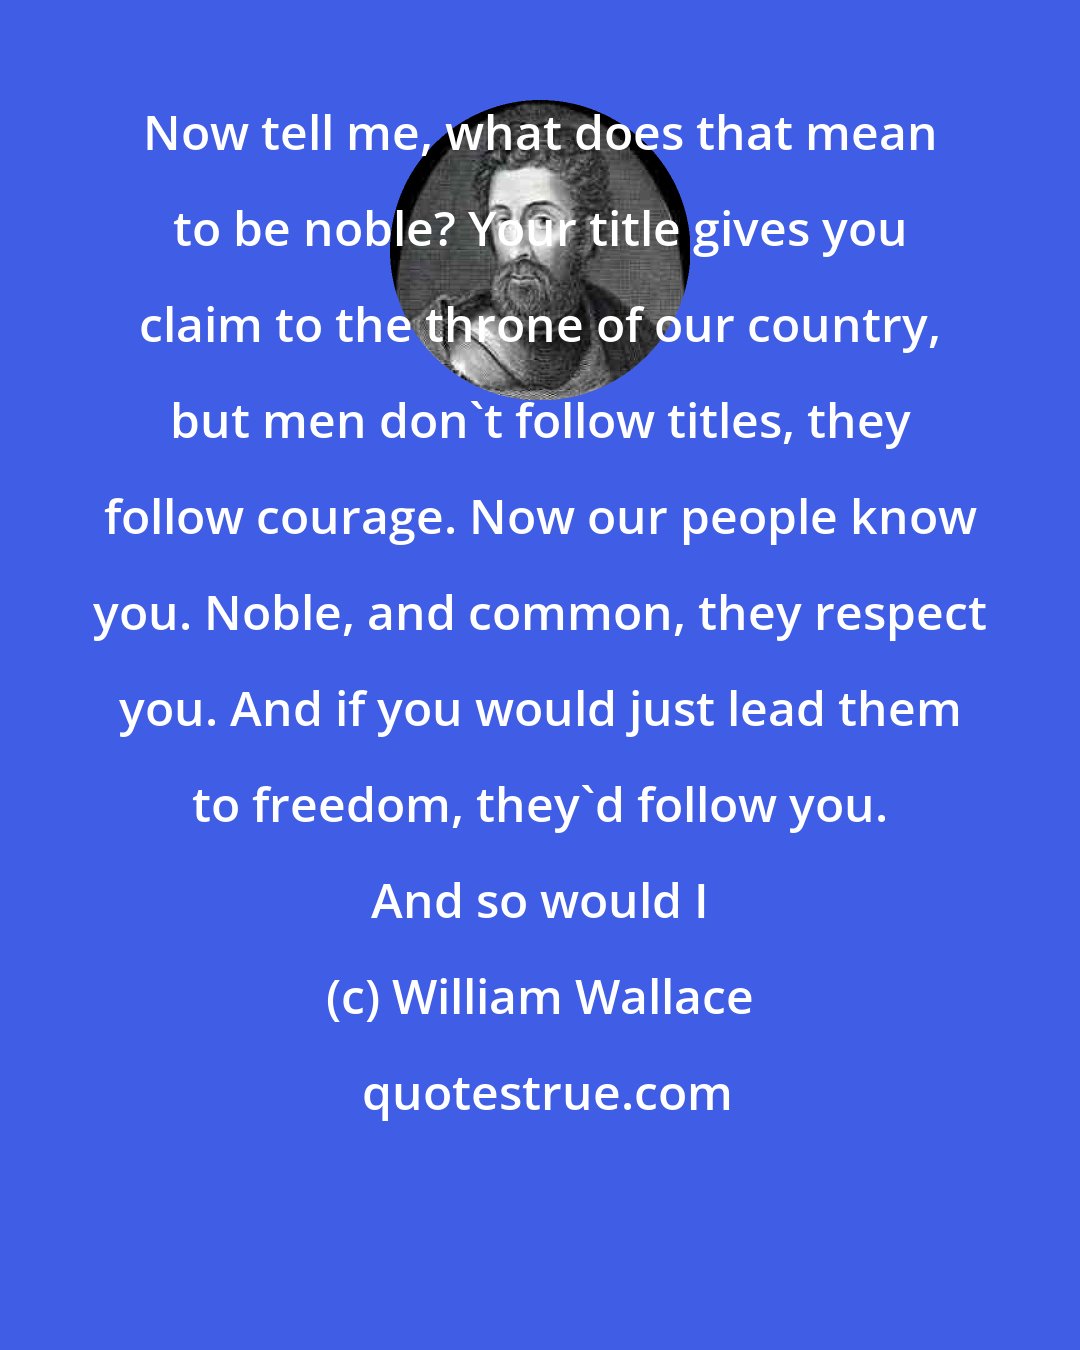 William Wallace: Now tell me, what does that mean to be noble? Your title gives you claim to the throne of our country, but men don't follow titles, they follow courage. Now our people know you. Noble, and common, they respect you. And if you would just lead them to freedom, they'd follow you. And so would I